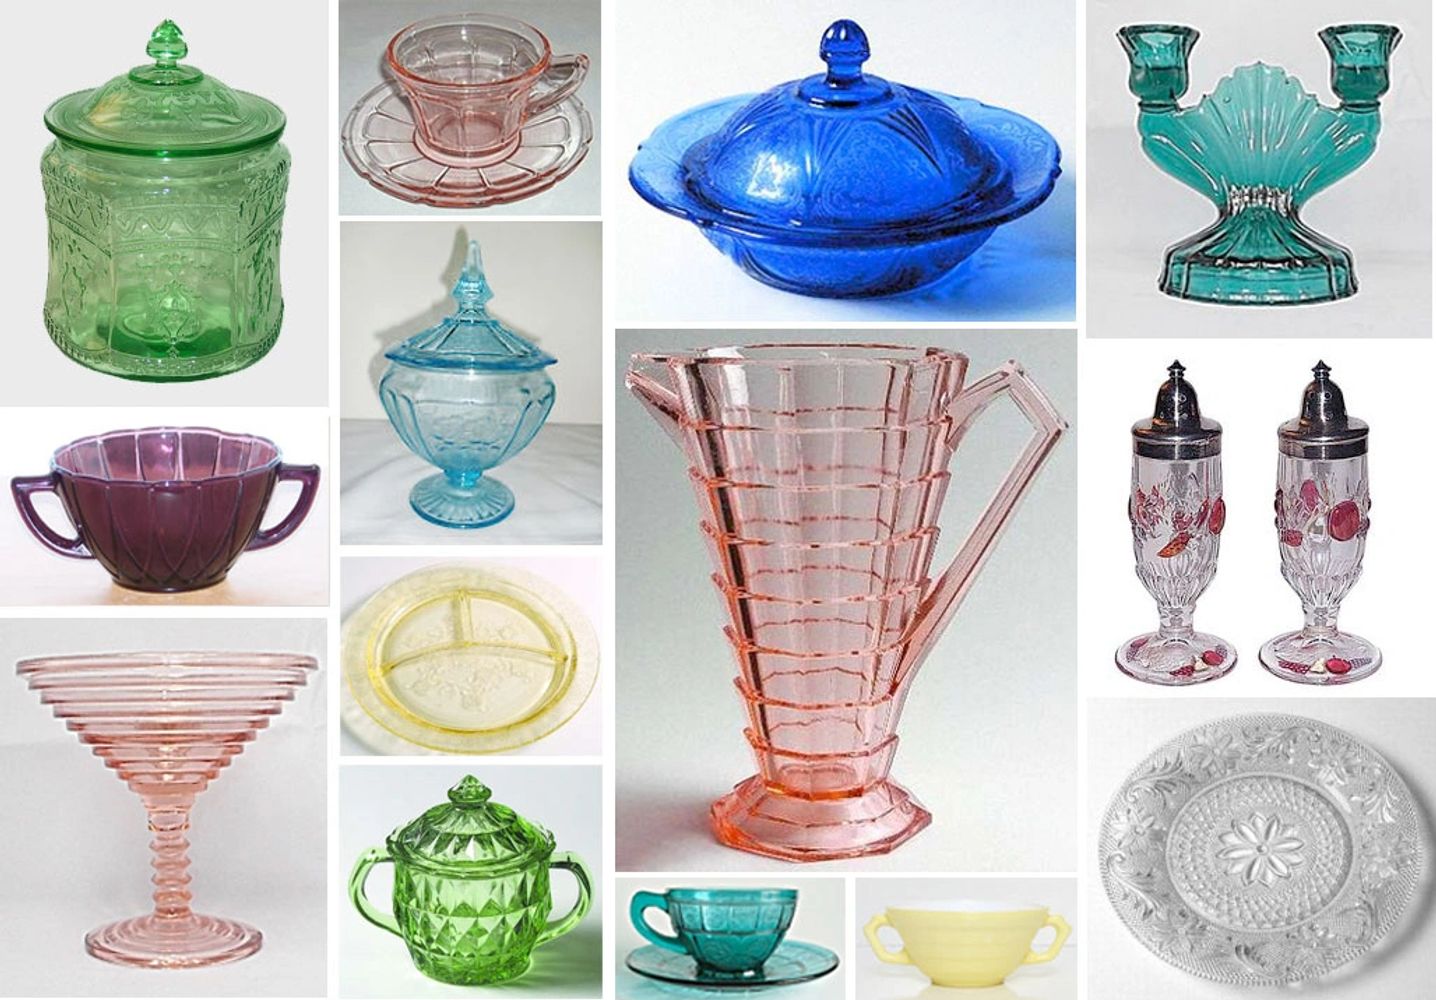 Pieces of depression glass